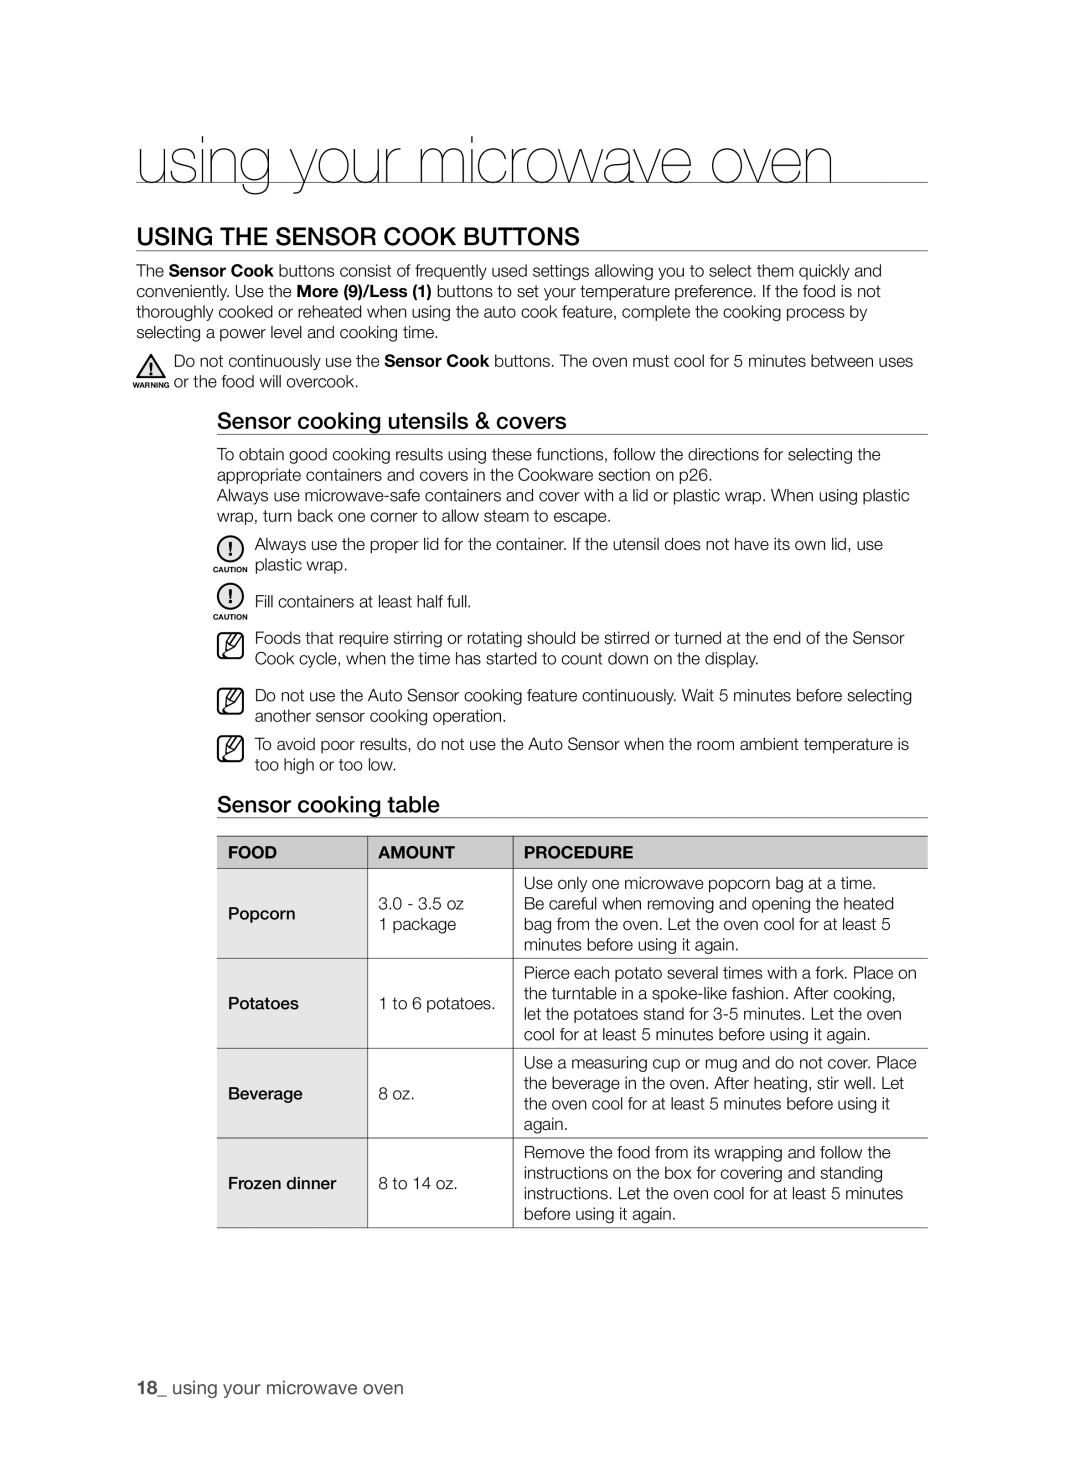 Samsung SMH7185 user manual Using the Sensor Cook buttons, using your microwave oven, Sensor cooking utensils & covers 